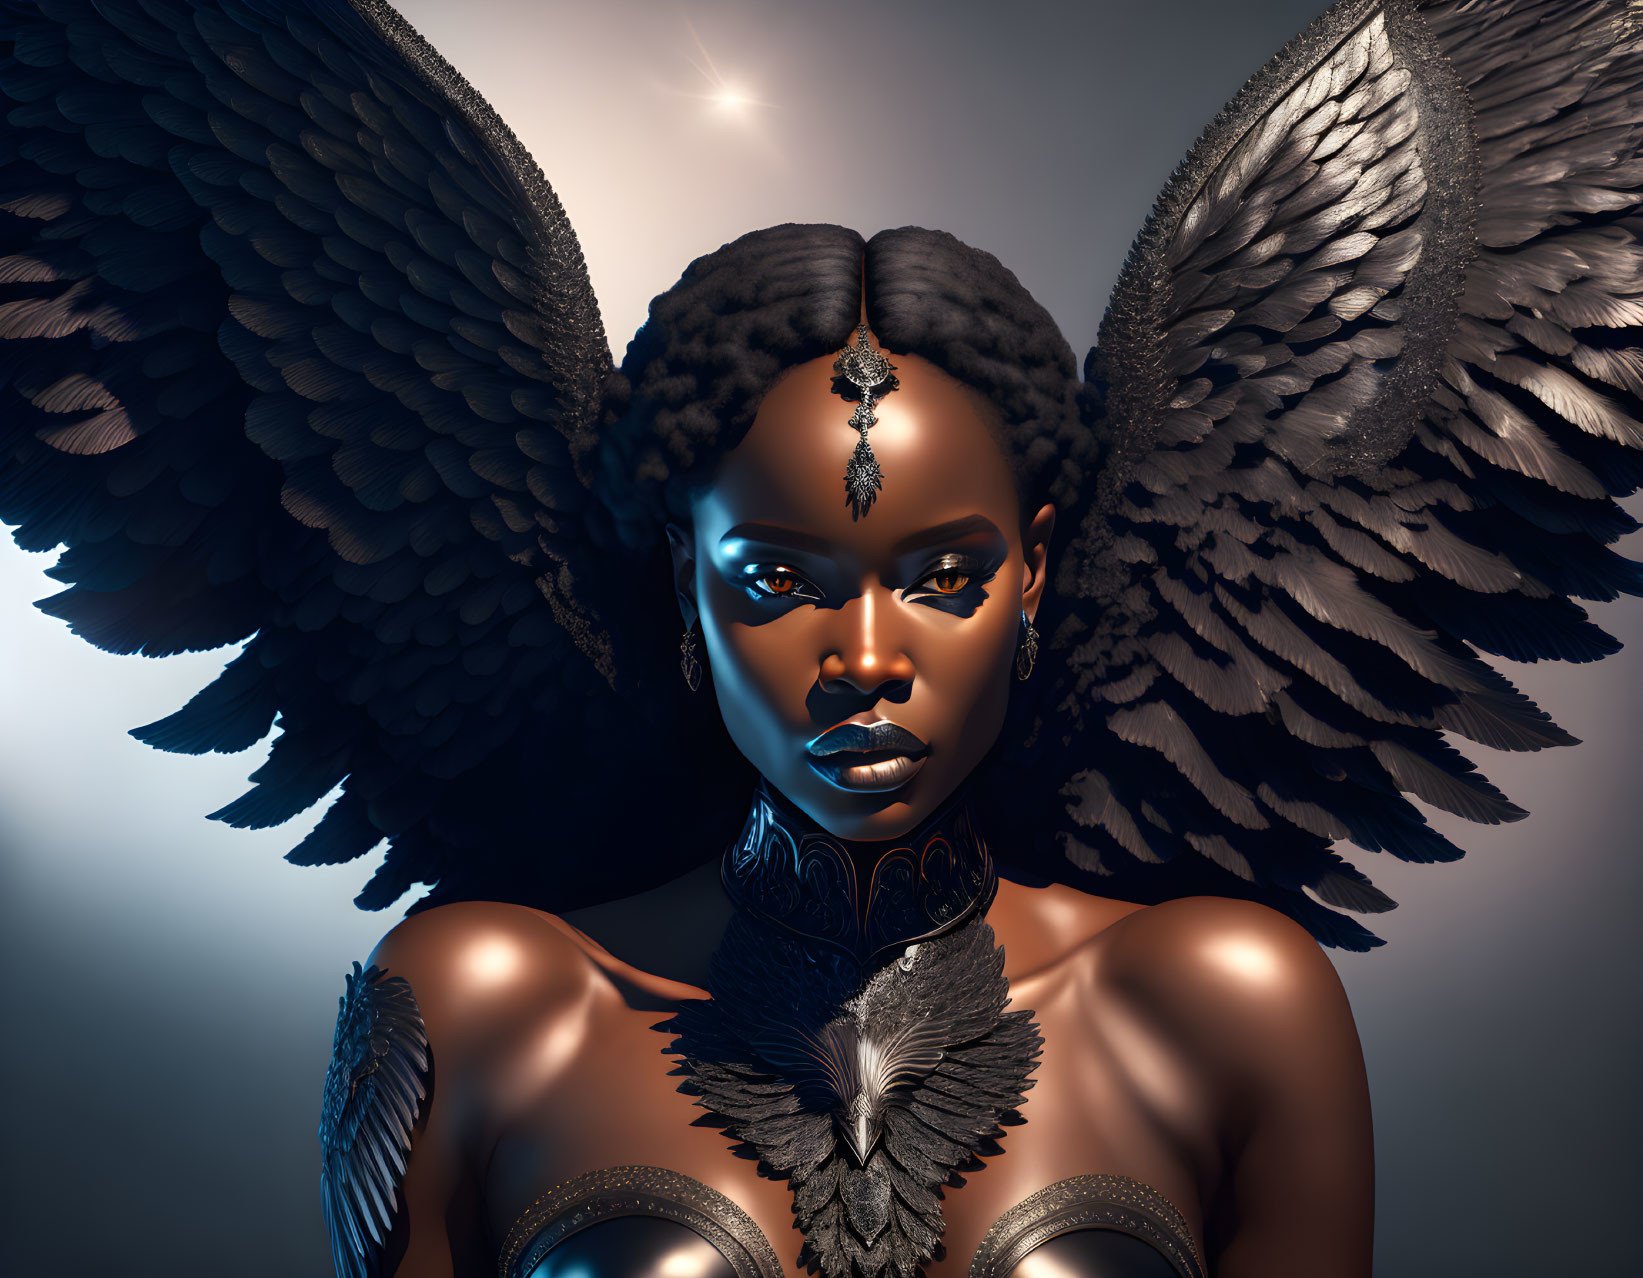 Dark-skinned woman with black feathered wings and intricate jewelry in stylized image